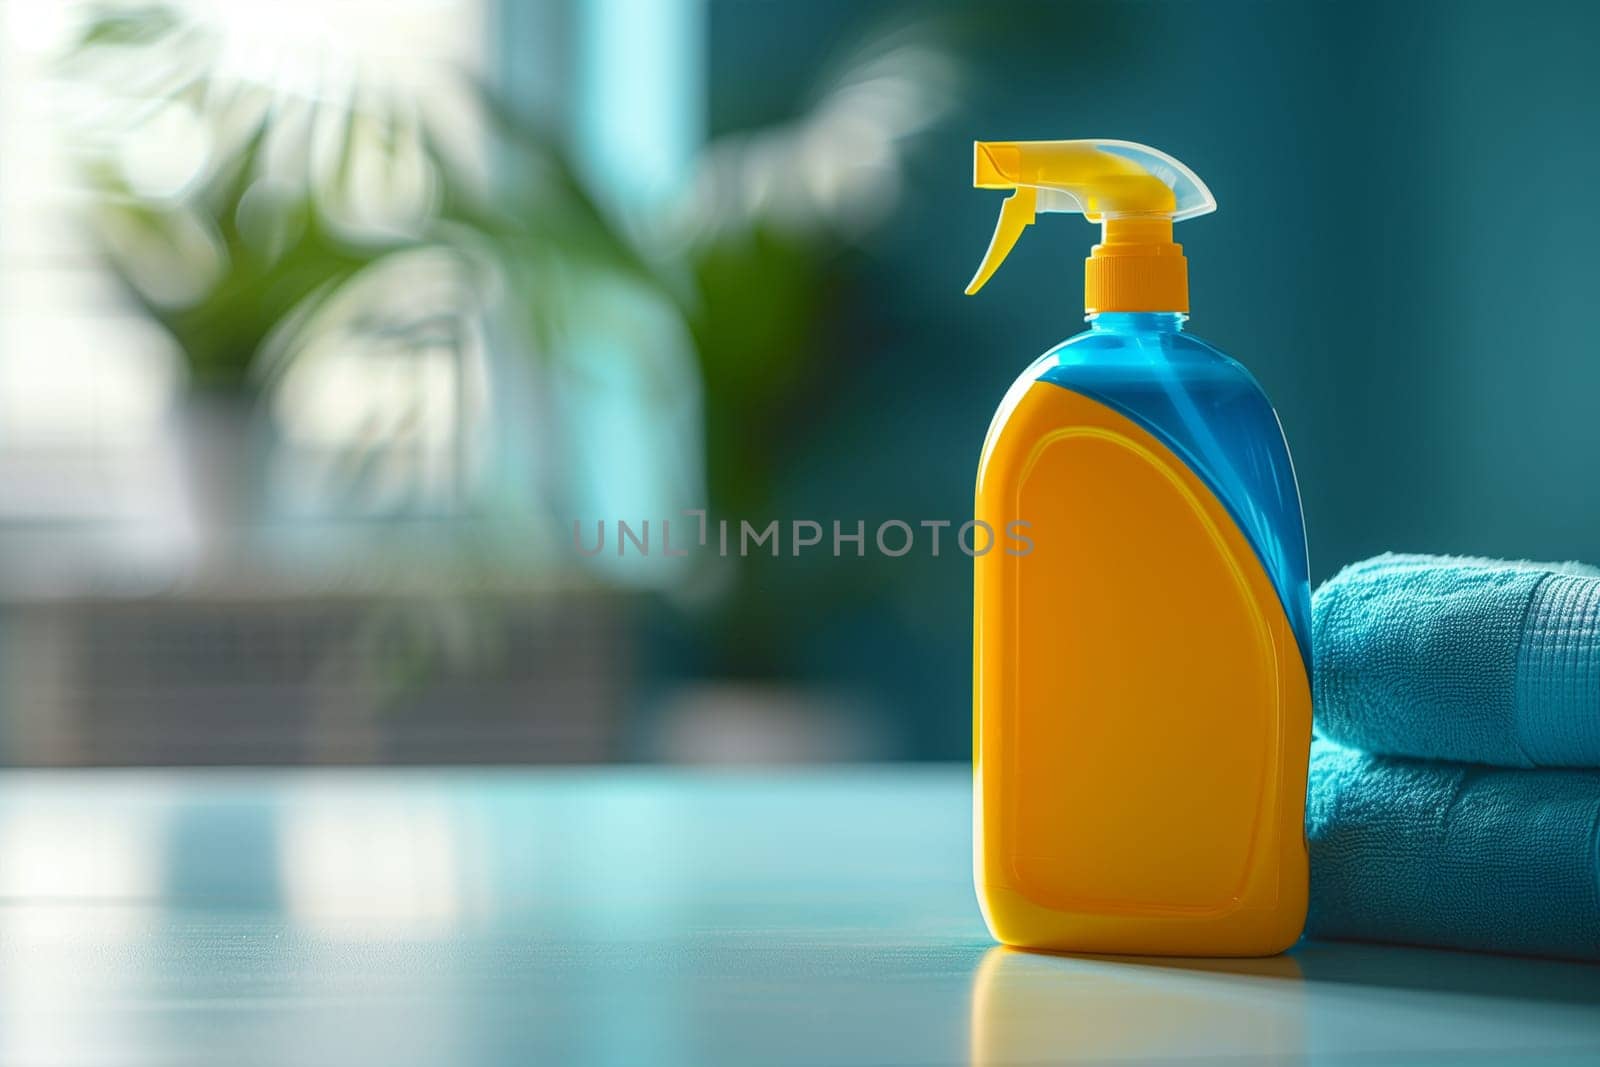 A yellow and blue cleaning spray bottle with a trigger sprayer is on a table, next to a stack of folded blue towels.